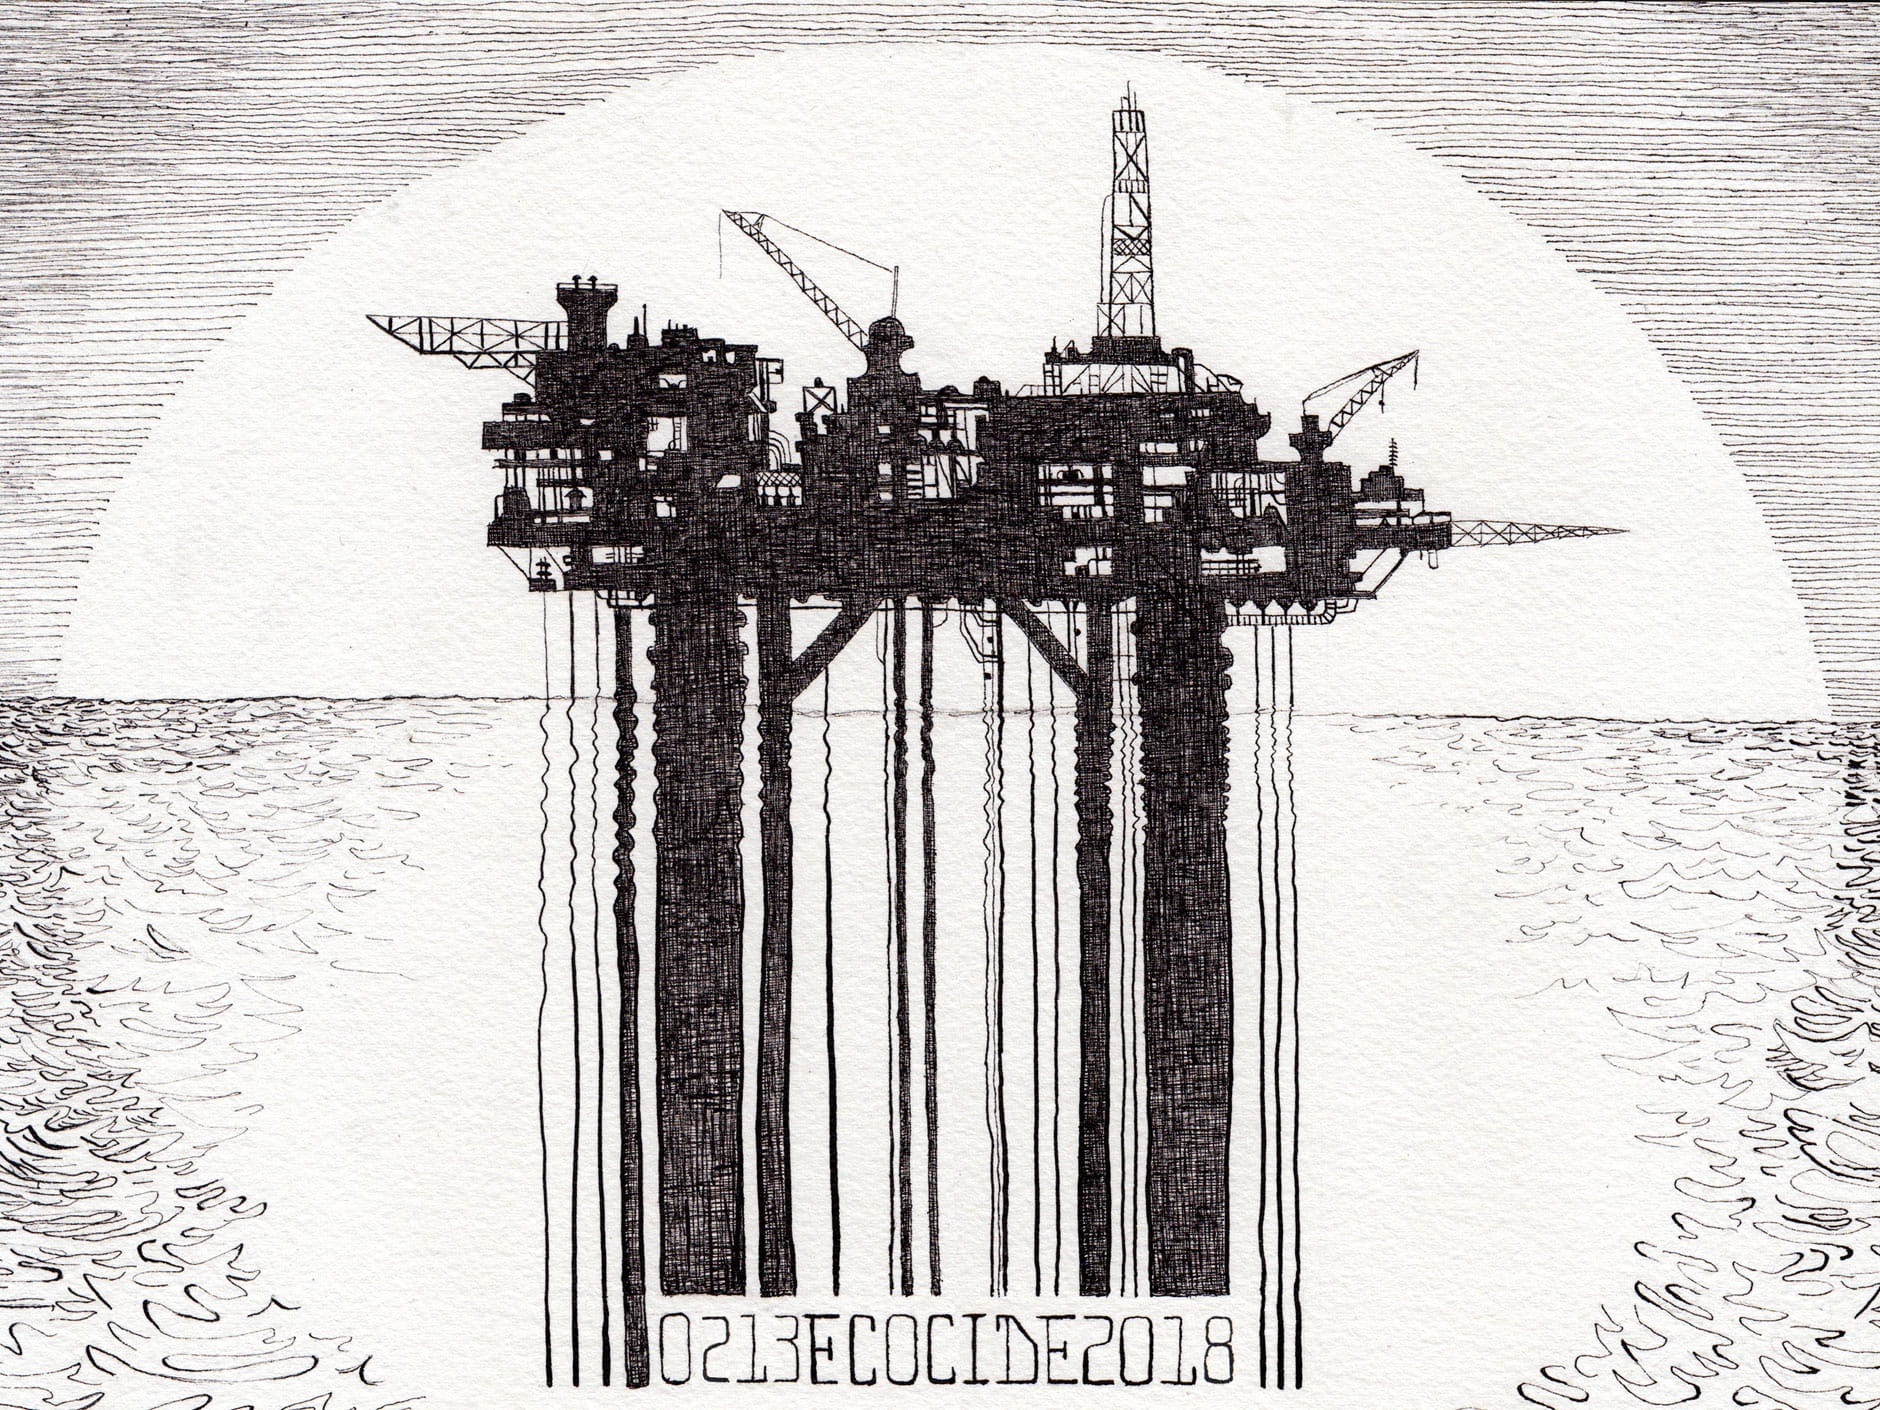 The image shows “Rigged Platform” Ink on paper, an art piece by Zoe Matthiessen